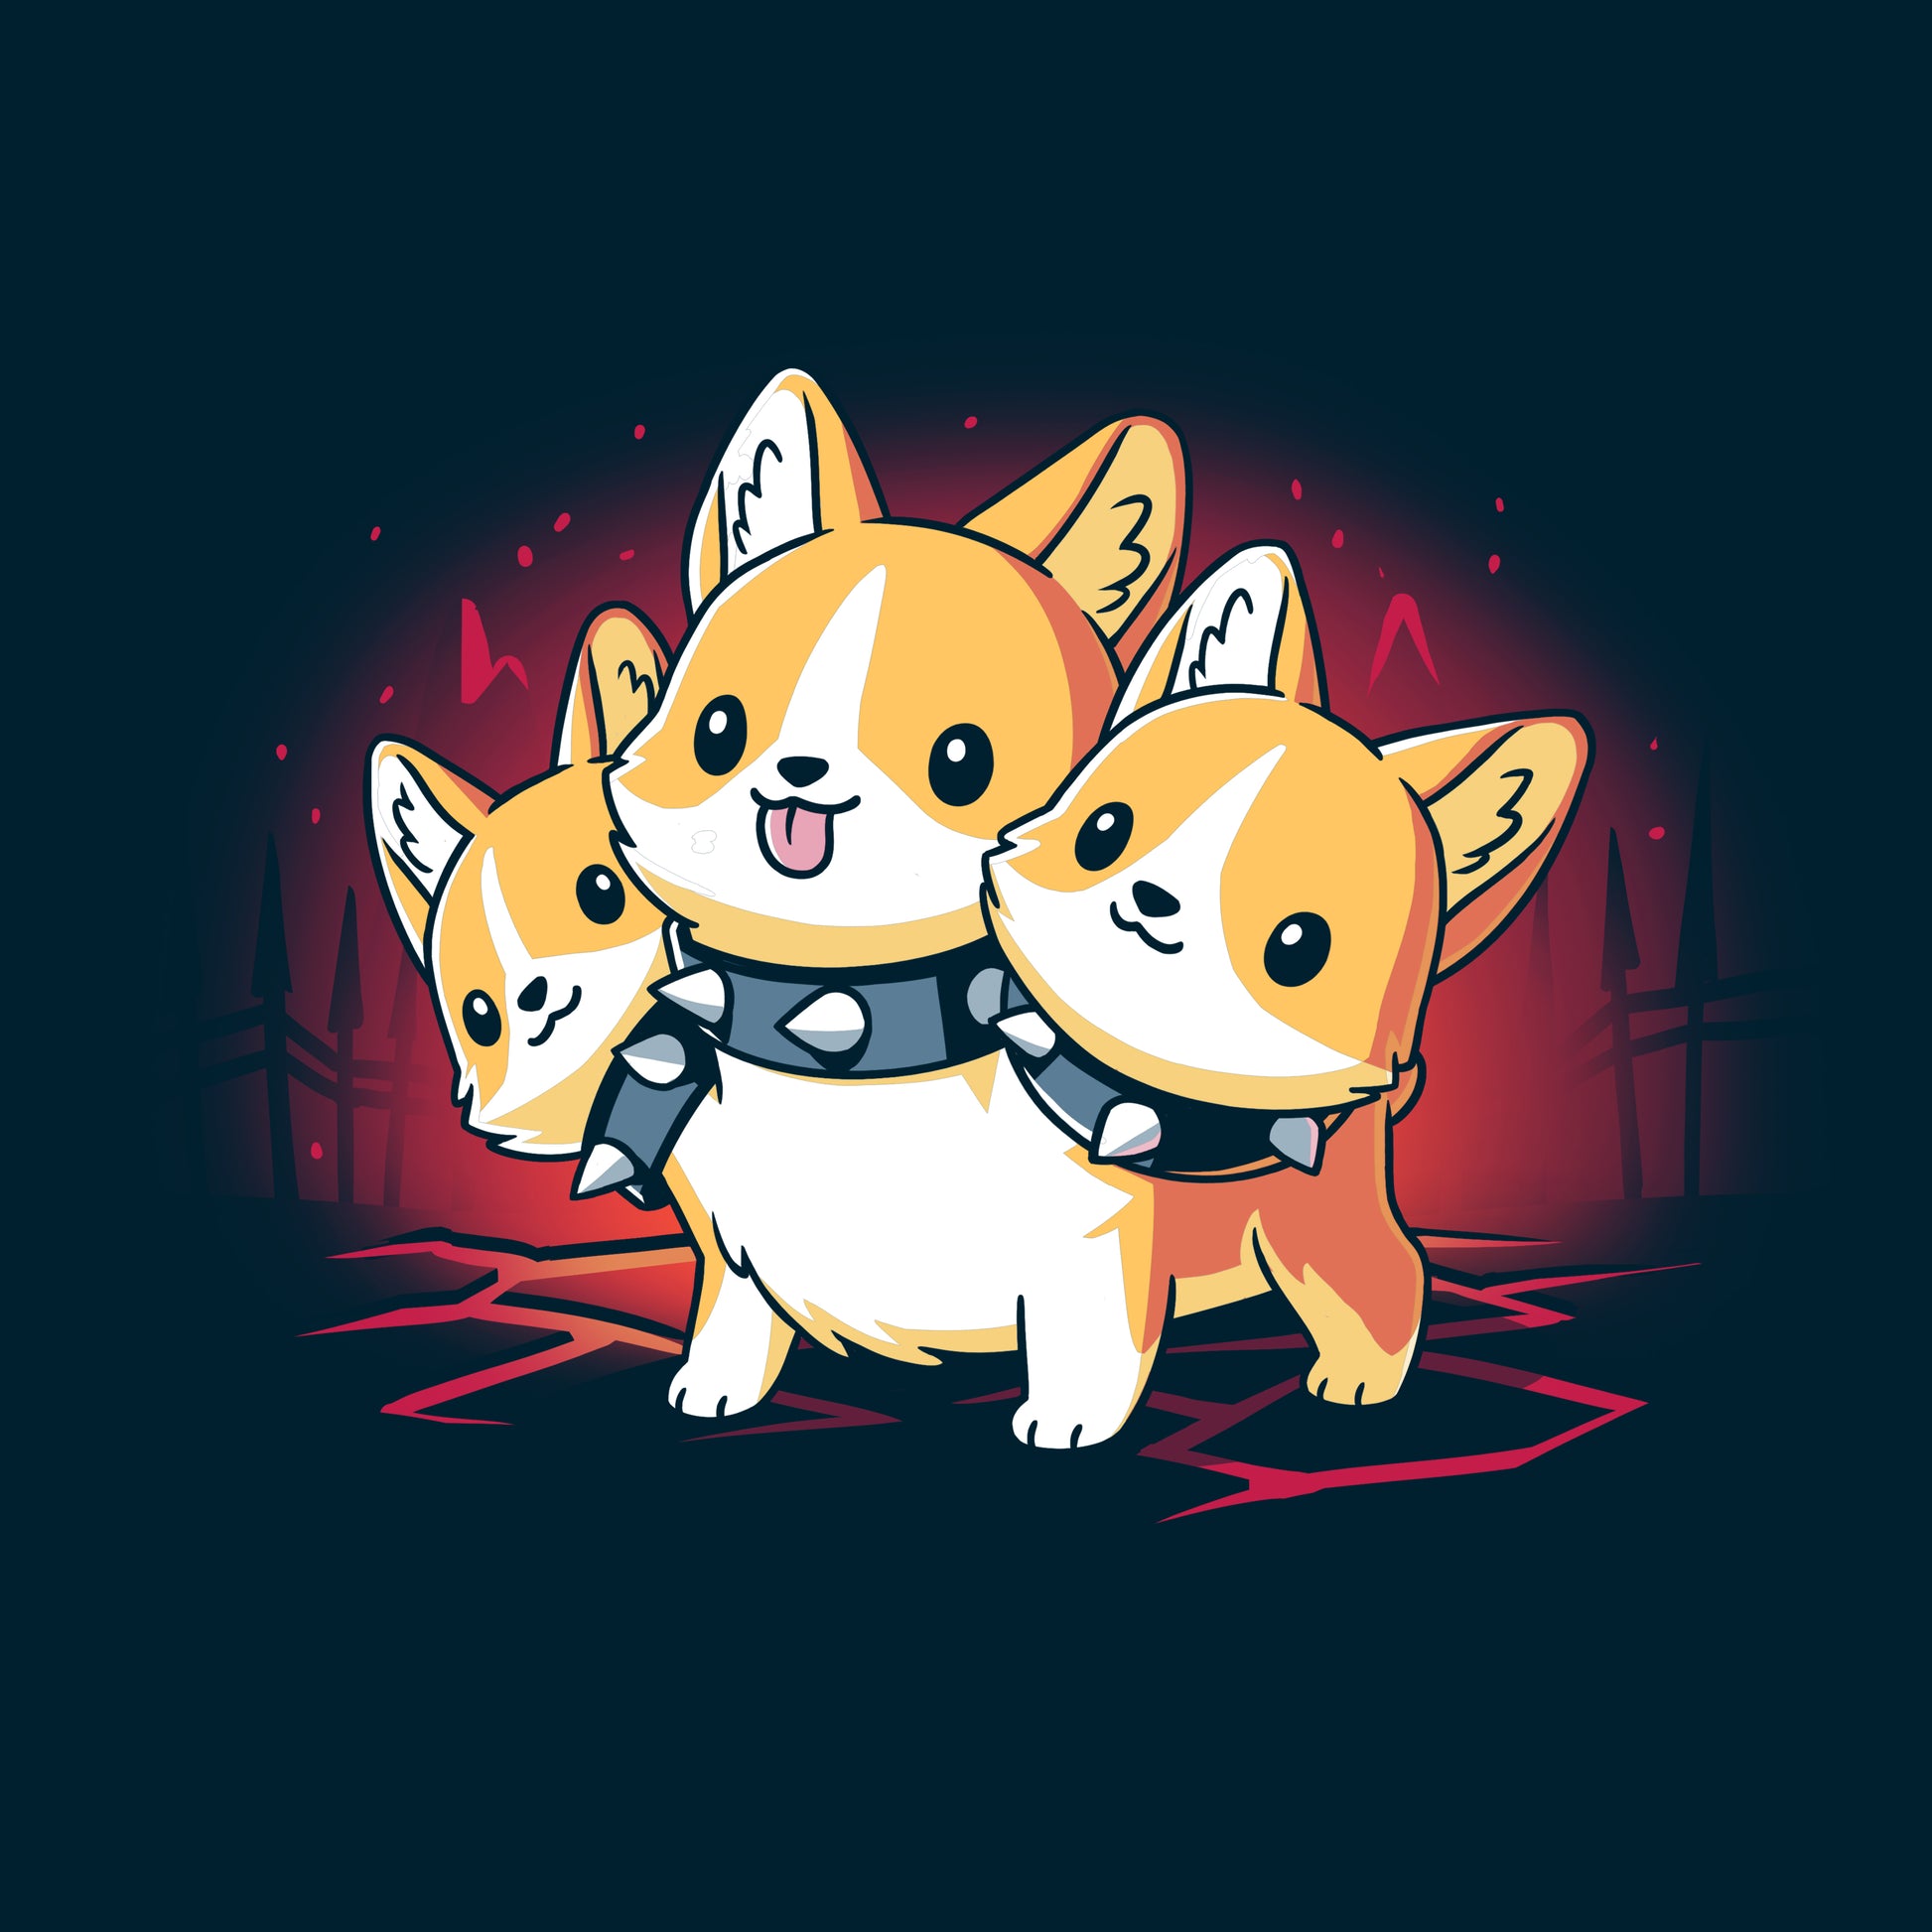 A cartoon depiction of a Corgi Cerberus with three heads wearing a spiked collar, set against a dark, eerie background with red highlights. The design is printed on the monsterdigital Corgi Cerberus navy blue t-shirt made from super soft ringspun cotton for ultimate comfort.